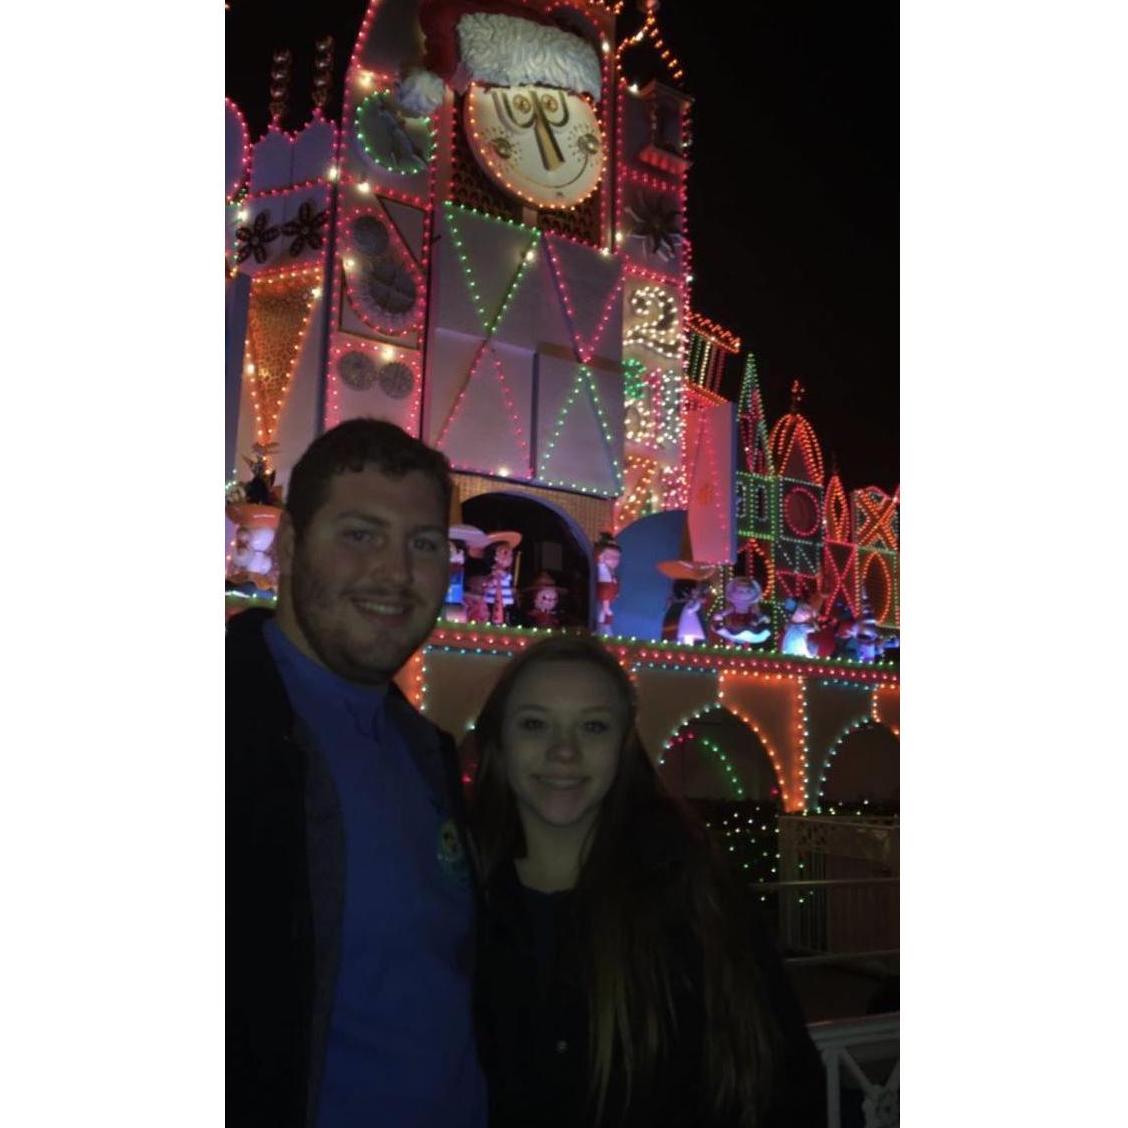 January 6, 2017 - Our First Disneyland Trip